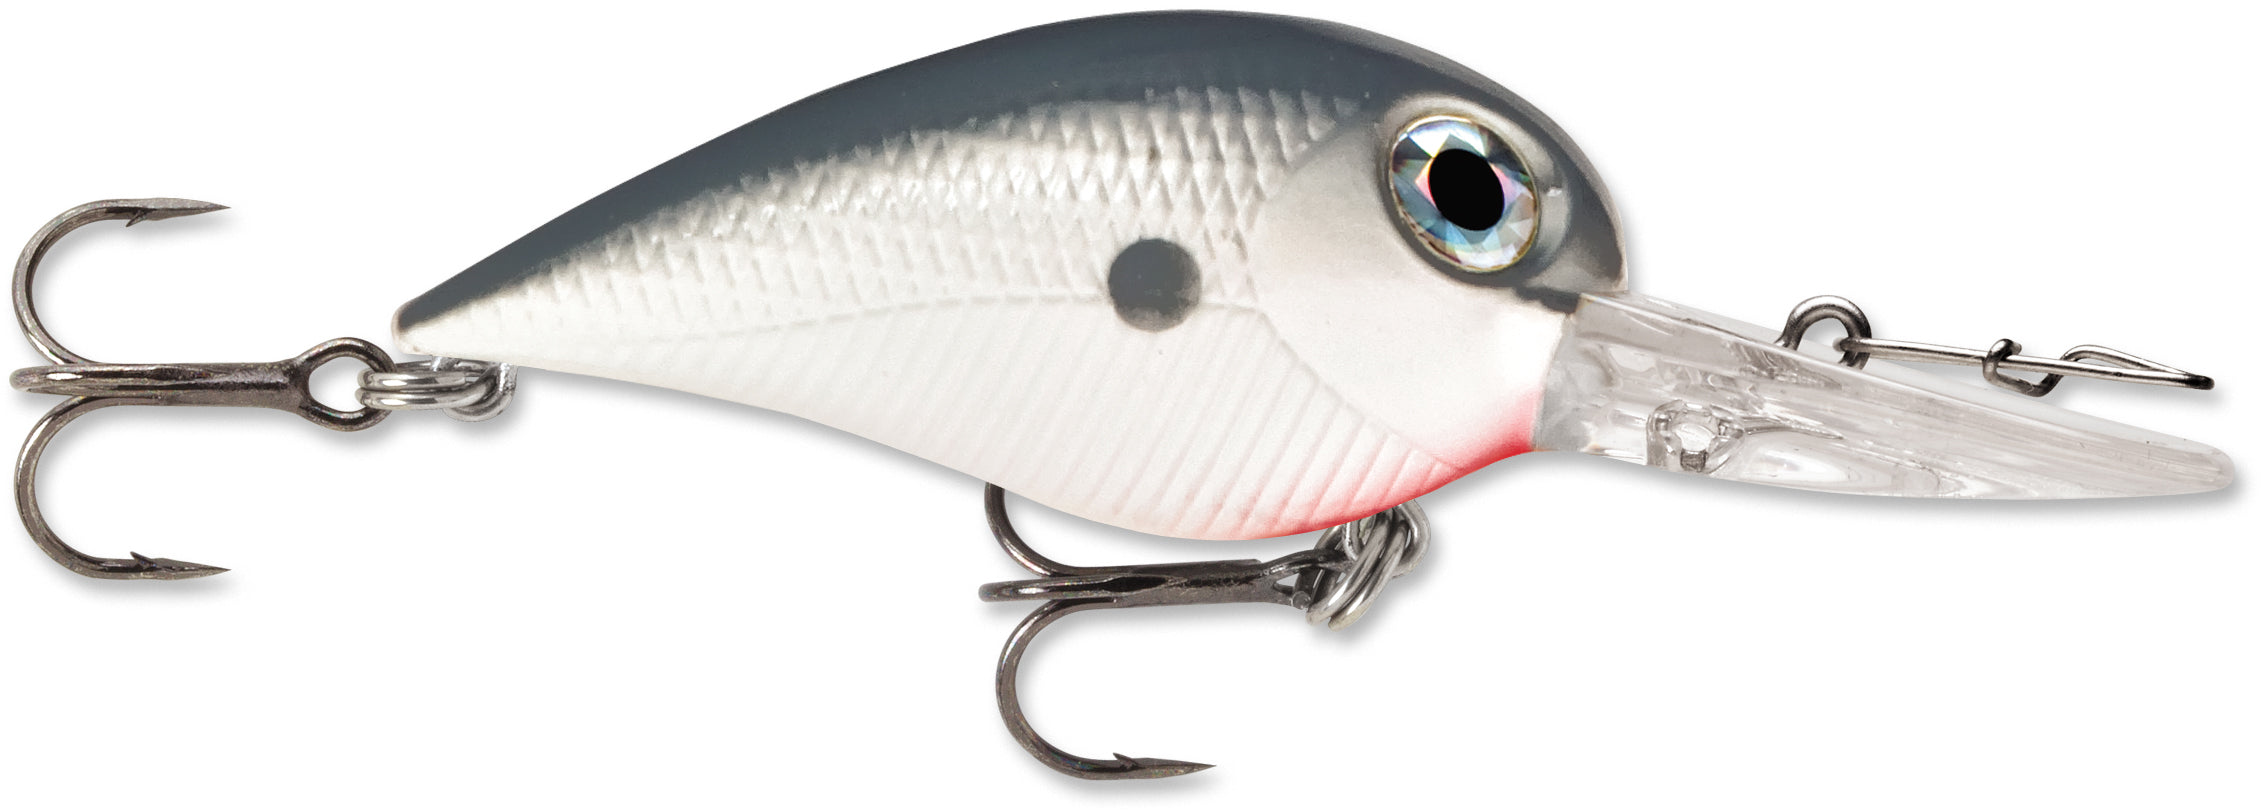  Storm Wiggle Wart MadFlash Hard Bait Lure : Fishing Topwater  Lures And Crankbaits : Sports & Outdoors